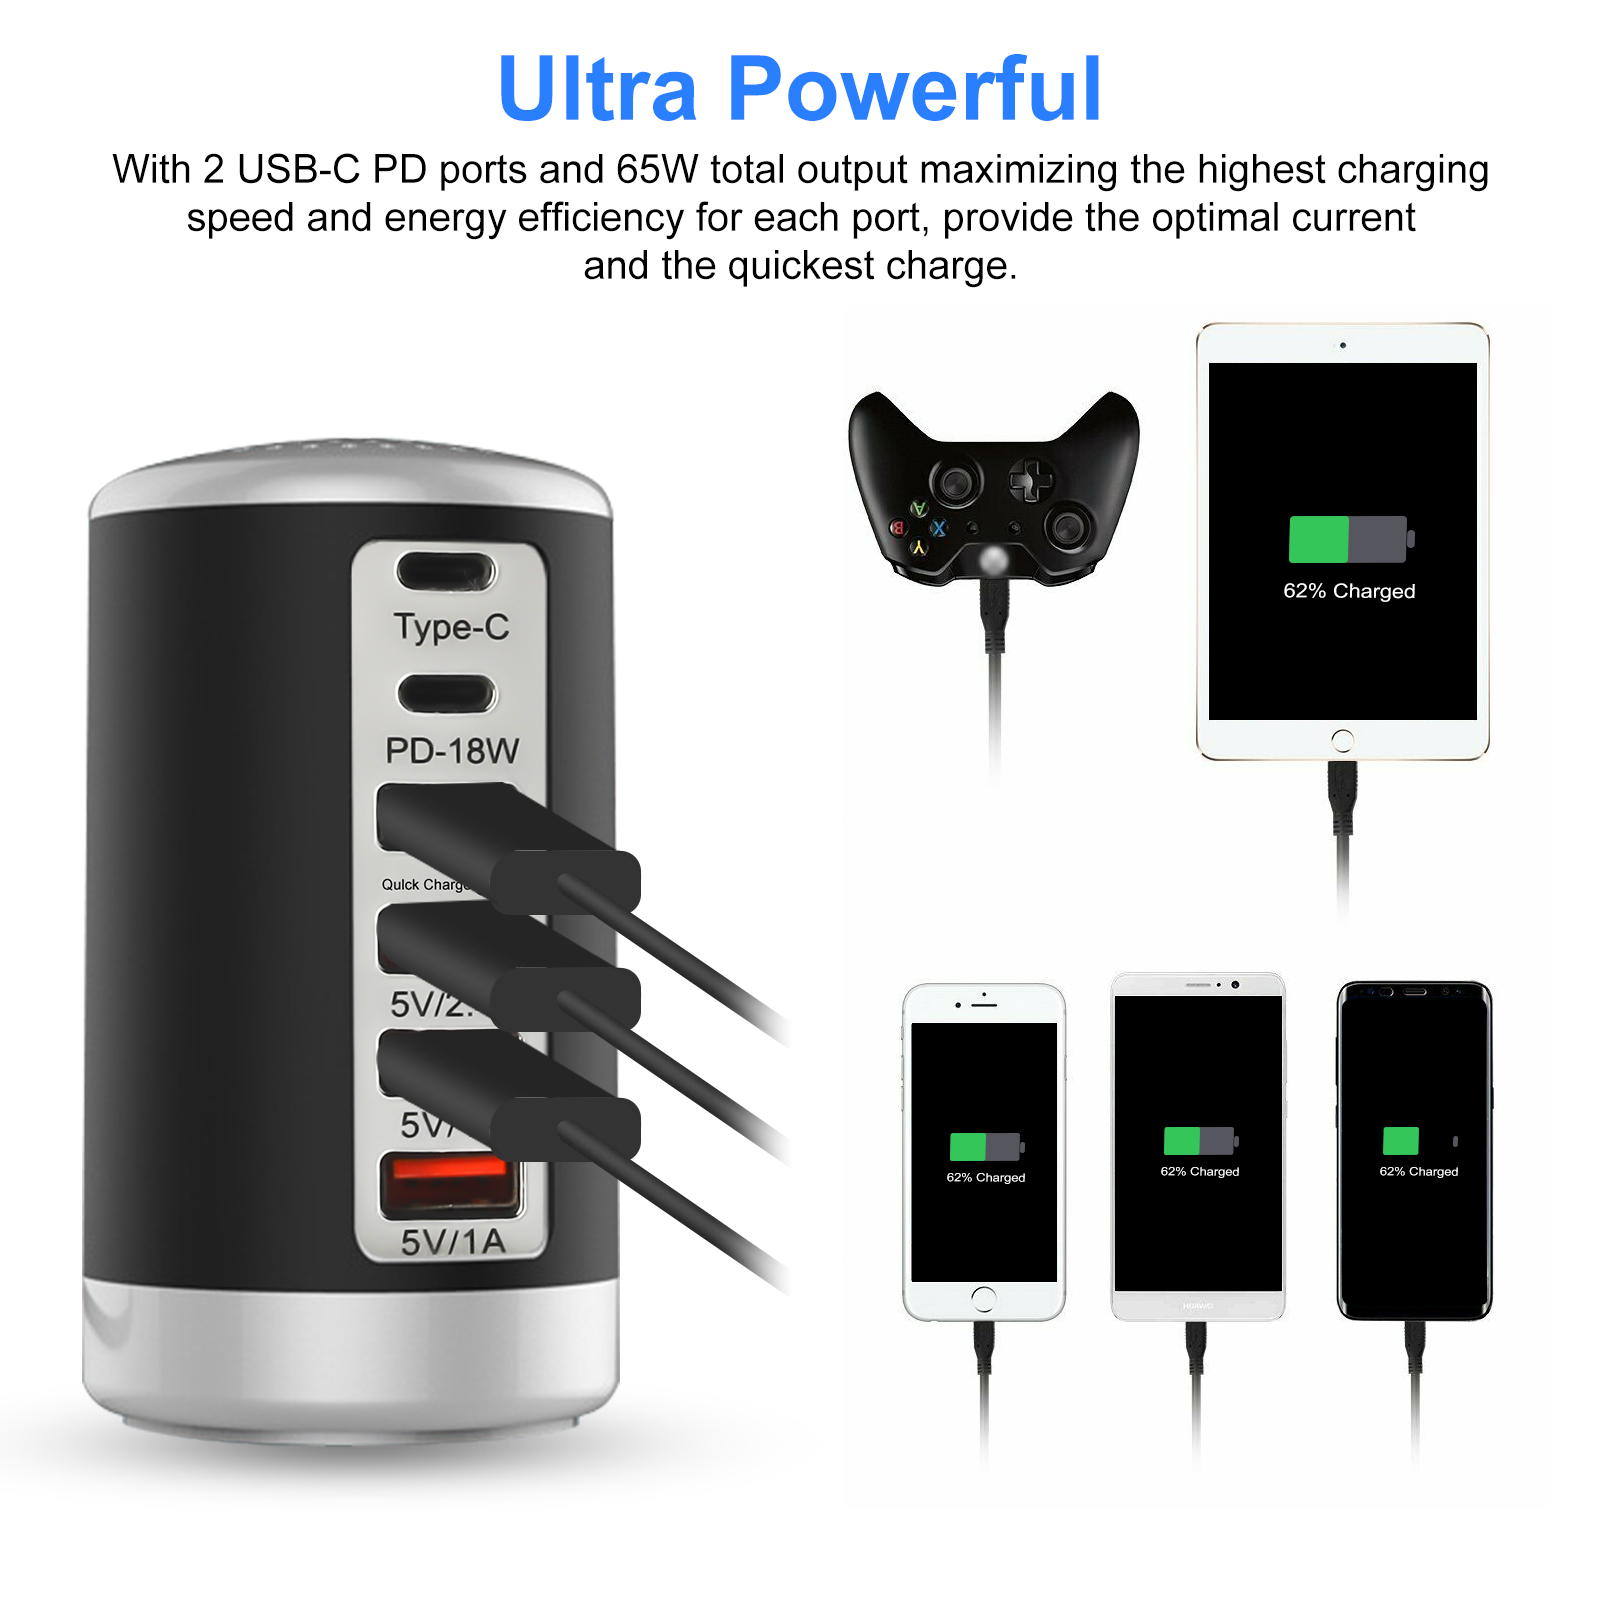 USB Charger, TSV 65W 6 Port Desktop USB Charging Station Hub Wall Charger (3 USB+Type C+QC3.0+PD 18W), Fast Charging Multi-Port Rapid Adapter Compatible with iPad, Smartphones, Tablets - image 3 of 9